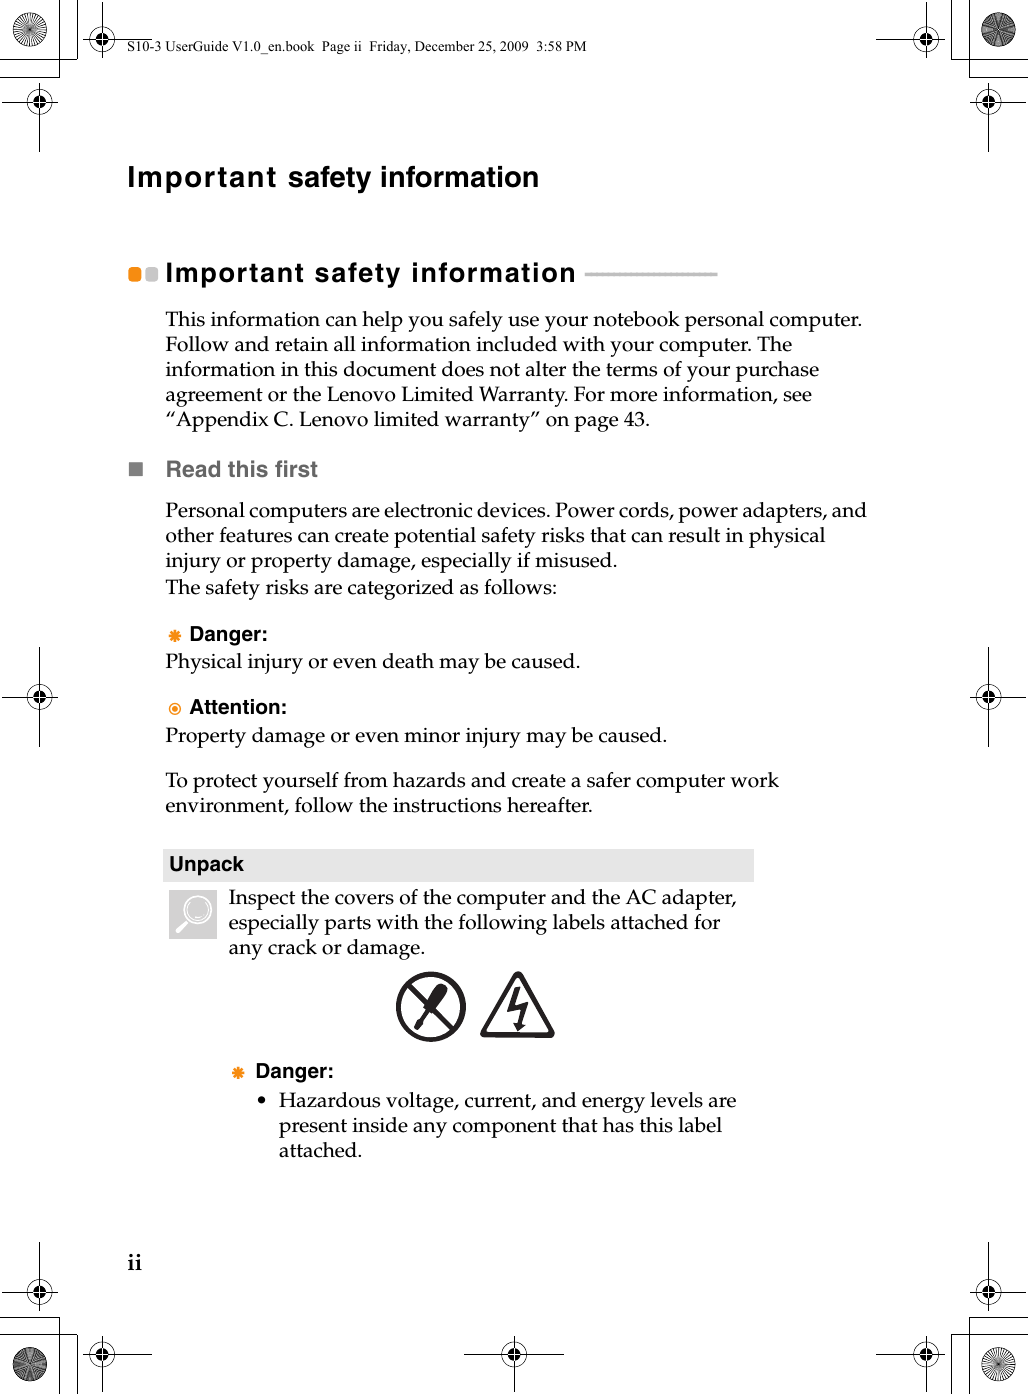 iiImportant safety informationImportant safety information  - - - - - - - - - - - - - - - - - - - - - - - This information can help you safely use your notebook personal computer. Follow and retain all information included with your computer. The information in this document does not alter the terms of your purchase agreement or the Lenovo Limited Warranty. For more information, see “Appendix C. Lenovo limited warranty” on page 43.Read this firstPersonal computers are electronic devices. Power cords, power adapters, and other features can create potential safety risks that can result in physical injury or property damage, especially if misused.The safety risks are categorized as follows:Danger:Physical injury or even death may be caused.Attention:Property damage or even minor injury may be caused.To protect yourself from hazards and create a safer computer work environment, follow the instructions hereafter.UnpackInspect the covers of the computer and the AC adapter, especially parts with the following labels attached for any crack or damage.Danger:• Hazardous voltage, current, and energy levels are present inside any component that has this label attached.S10-3 UserGuide V1.0_en.book  Page ii  Friday, December 25, 2009  3:58 PM